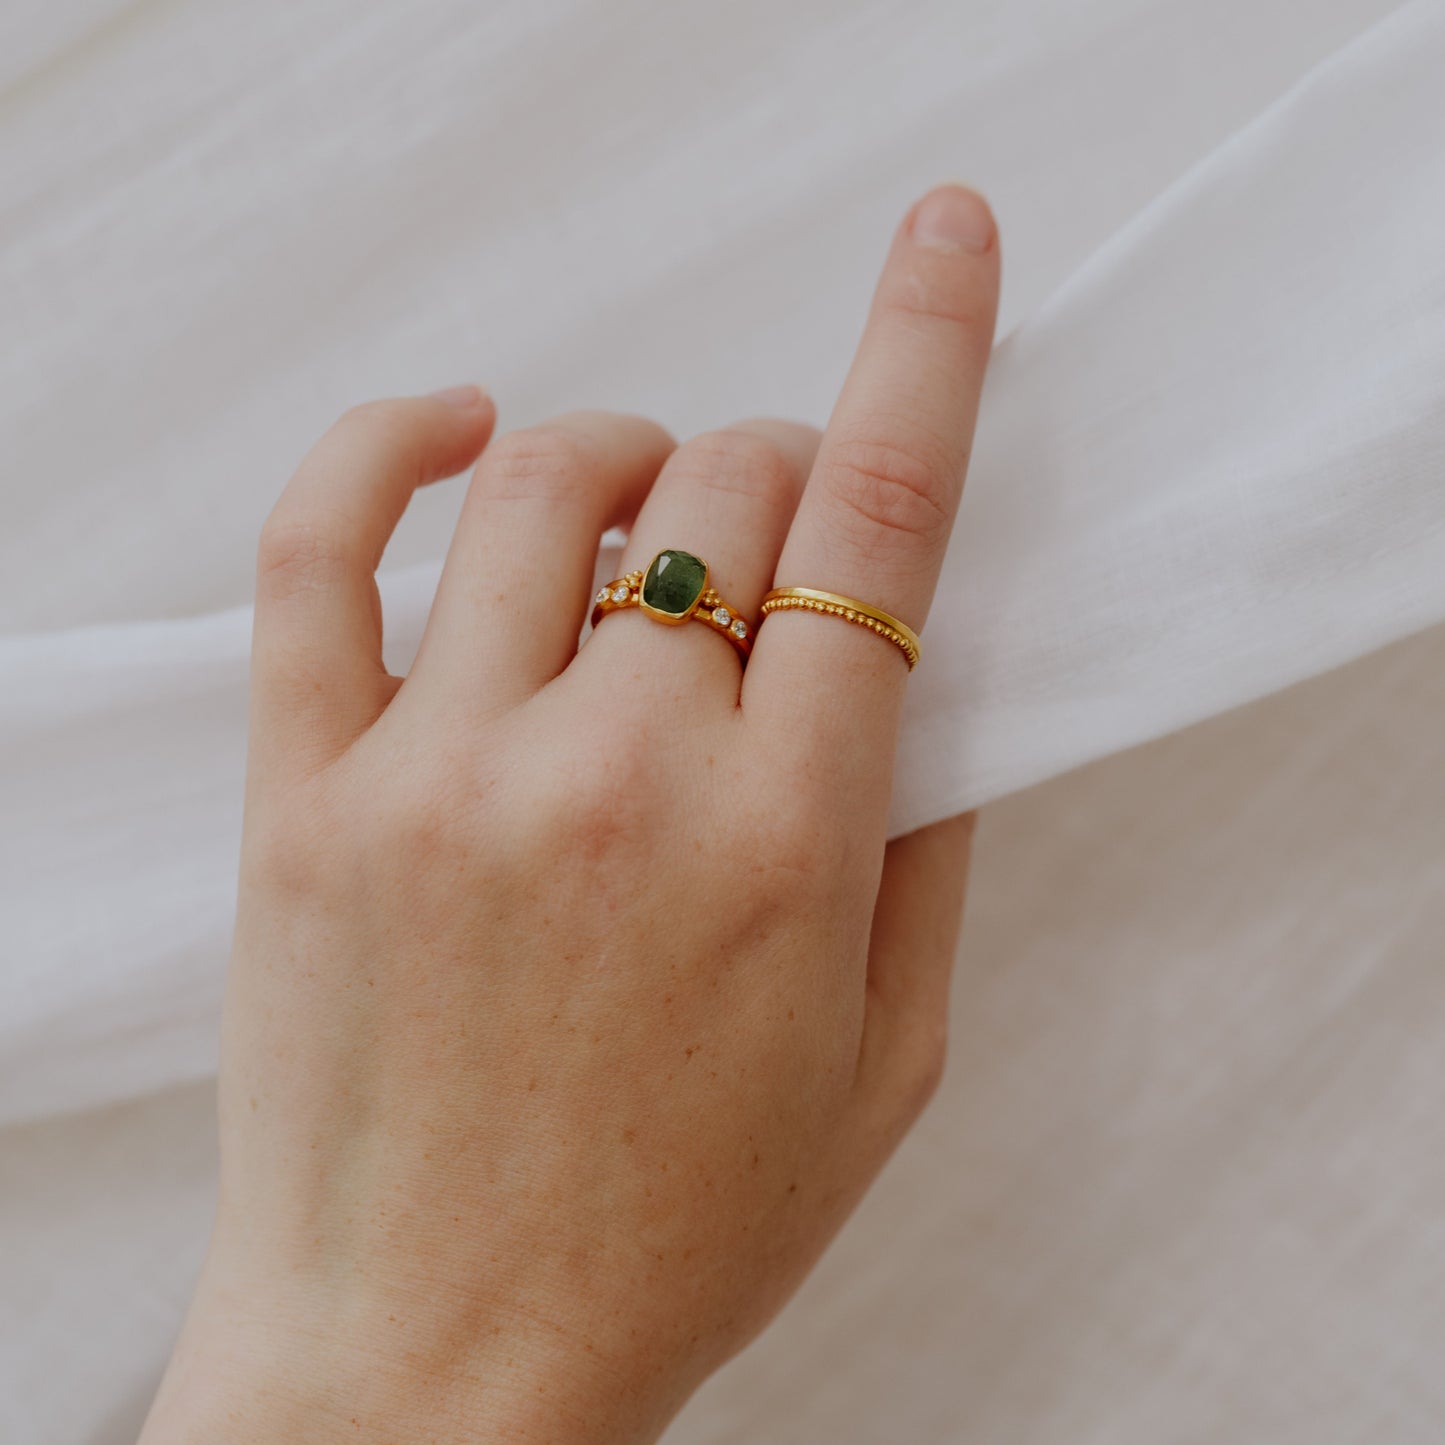 Unique handcrafted gold rings worn on an elegant hand, each with intricate granulation and adorned with a beautiful forest green tourmaline gemstone.